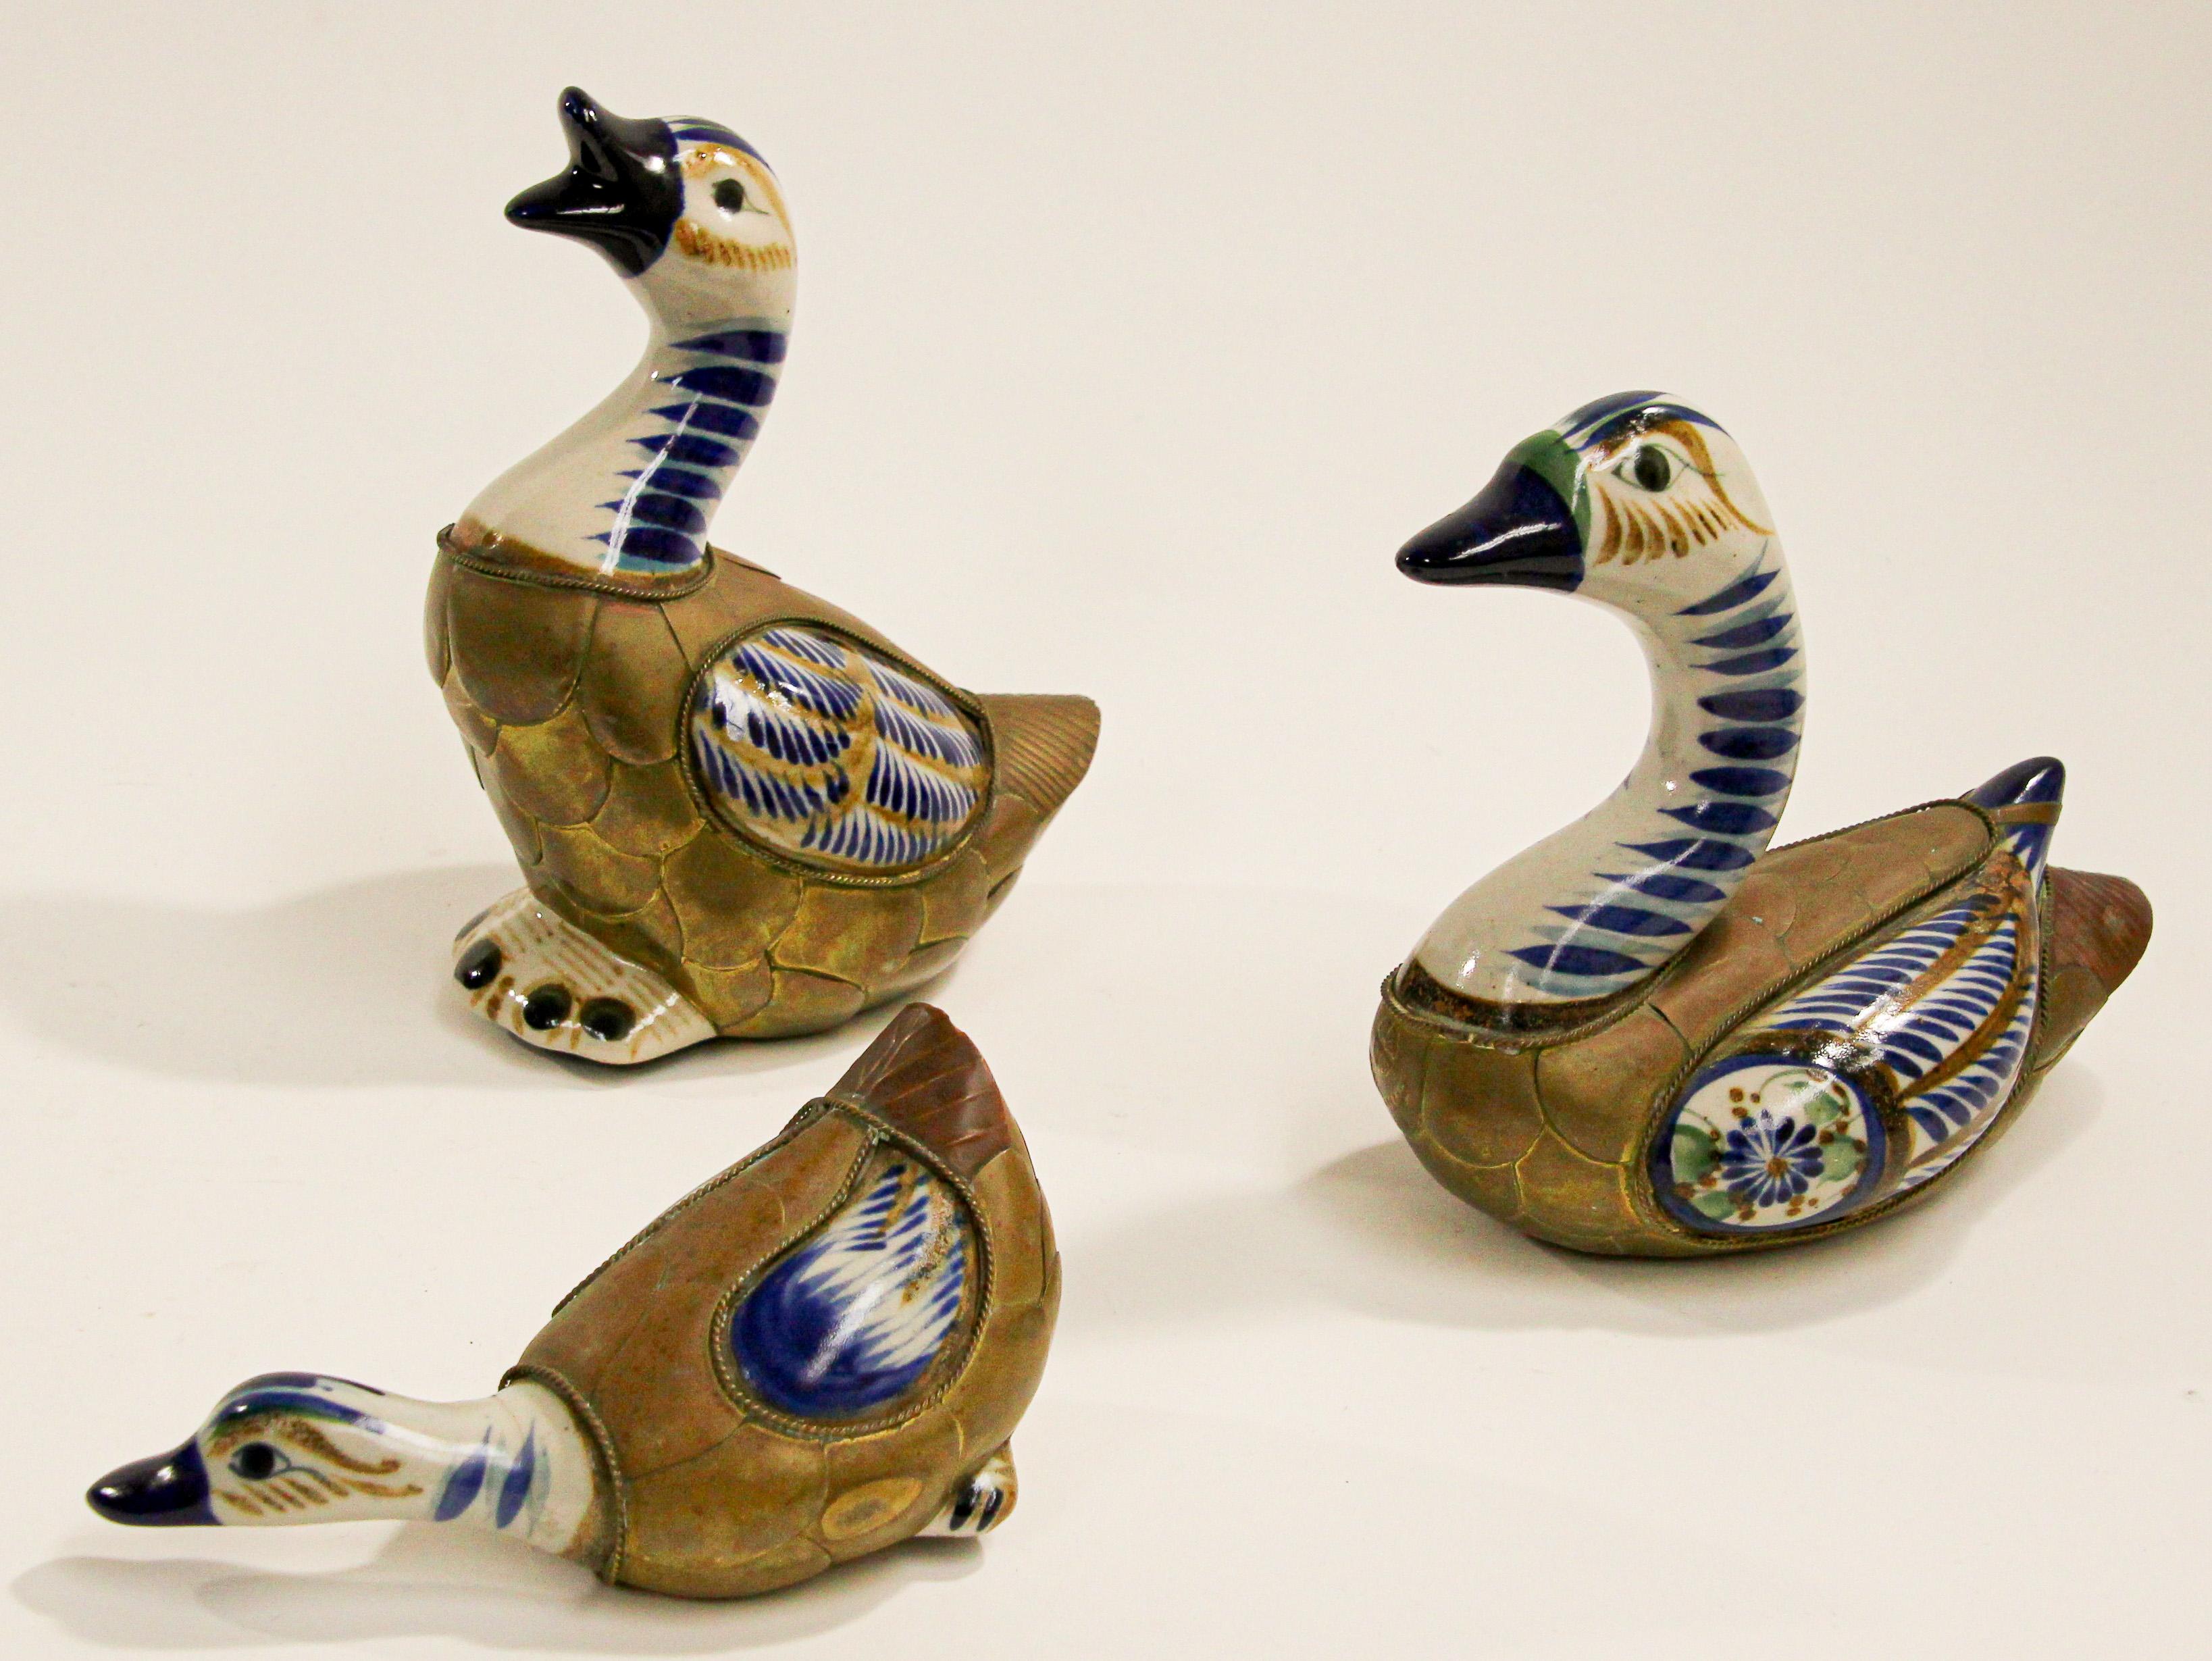 Vintage Mexican Tonala hand painted pottery birds Folk Art with brass decoration in the style of Sergio Bustamante.
Vintage Mexican ceramic and brass hand painted Tonala pottery ducks.
Flora de la Cruz Acapulco Gro Mexico hand painted ceramic, set